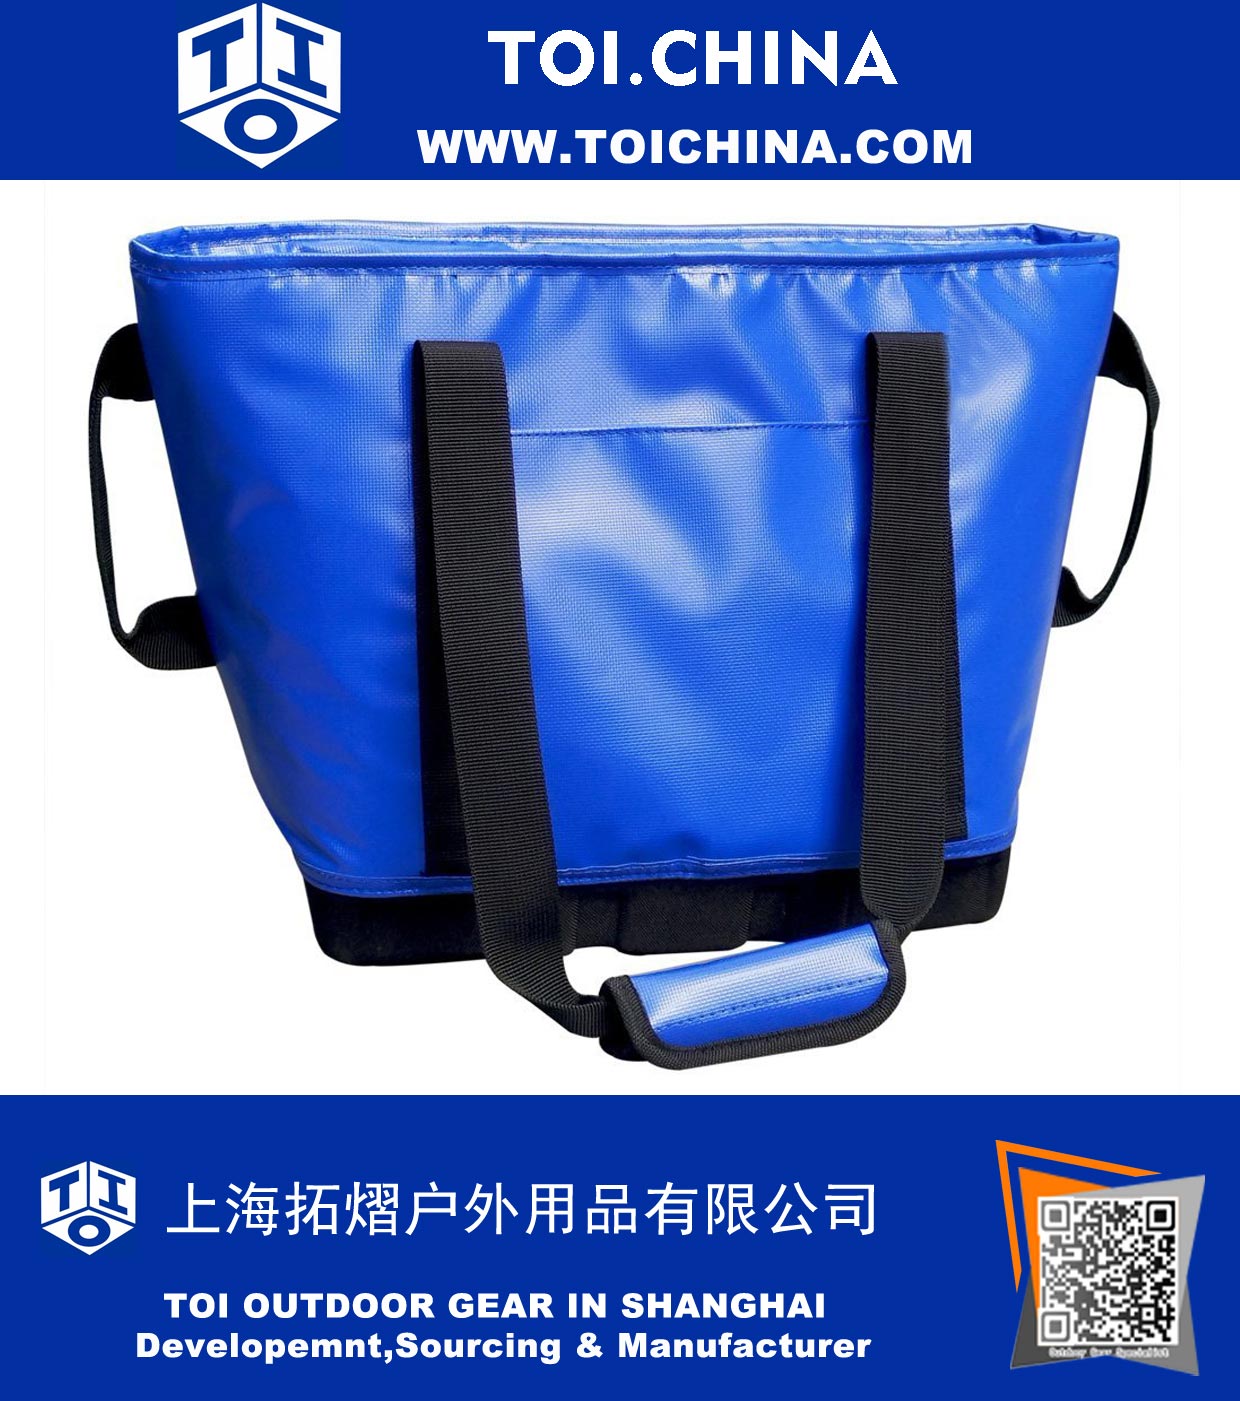 Outdoor Waterproof Vinyl Cooler Tote 30 Can Blue, Perfect for Shopping, Camping, Fishing, Hiking or Outdoor Picnic